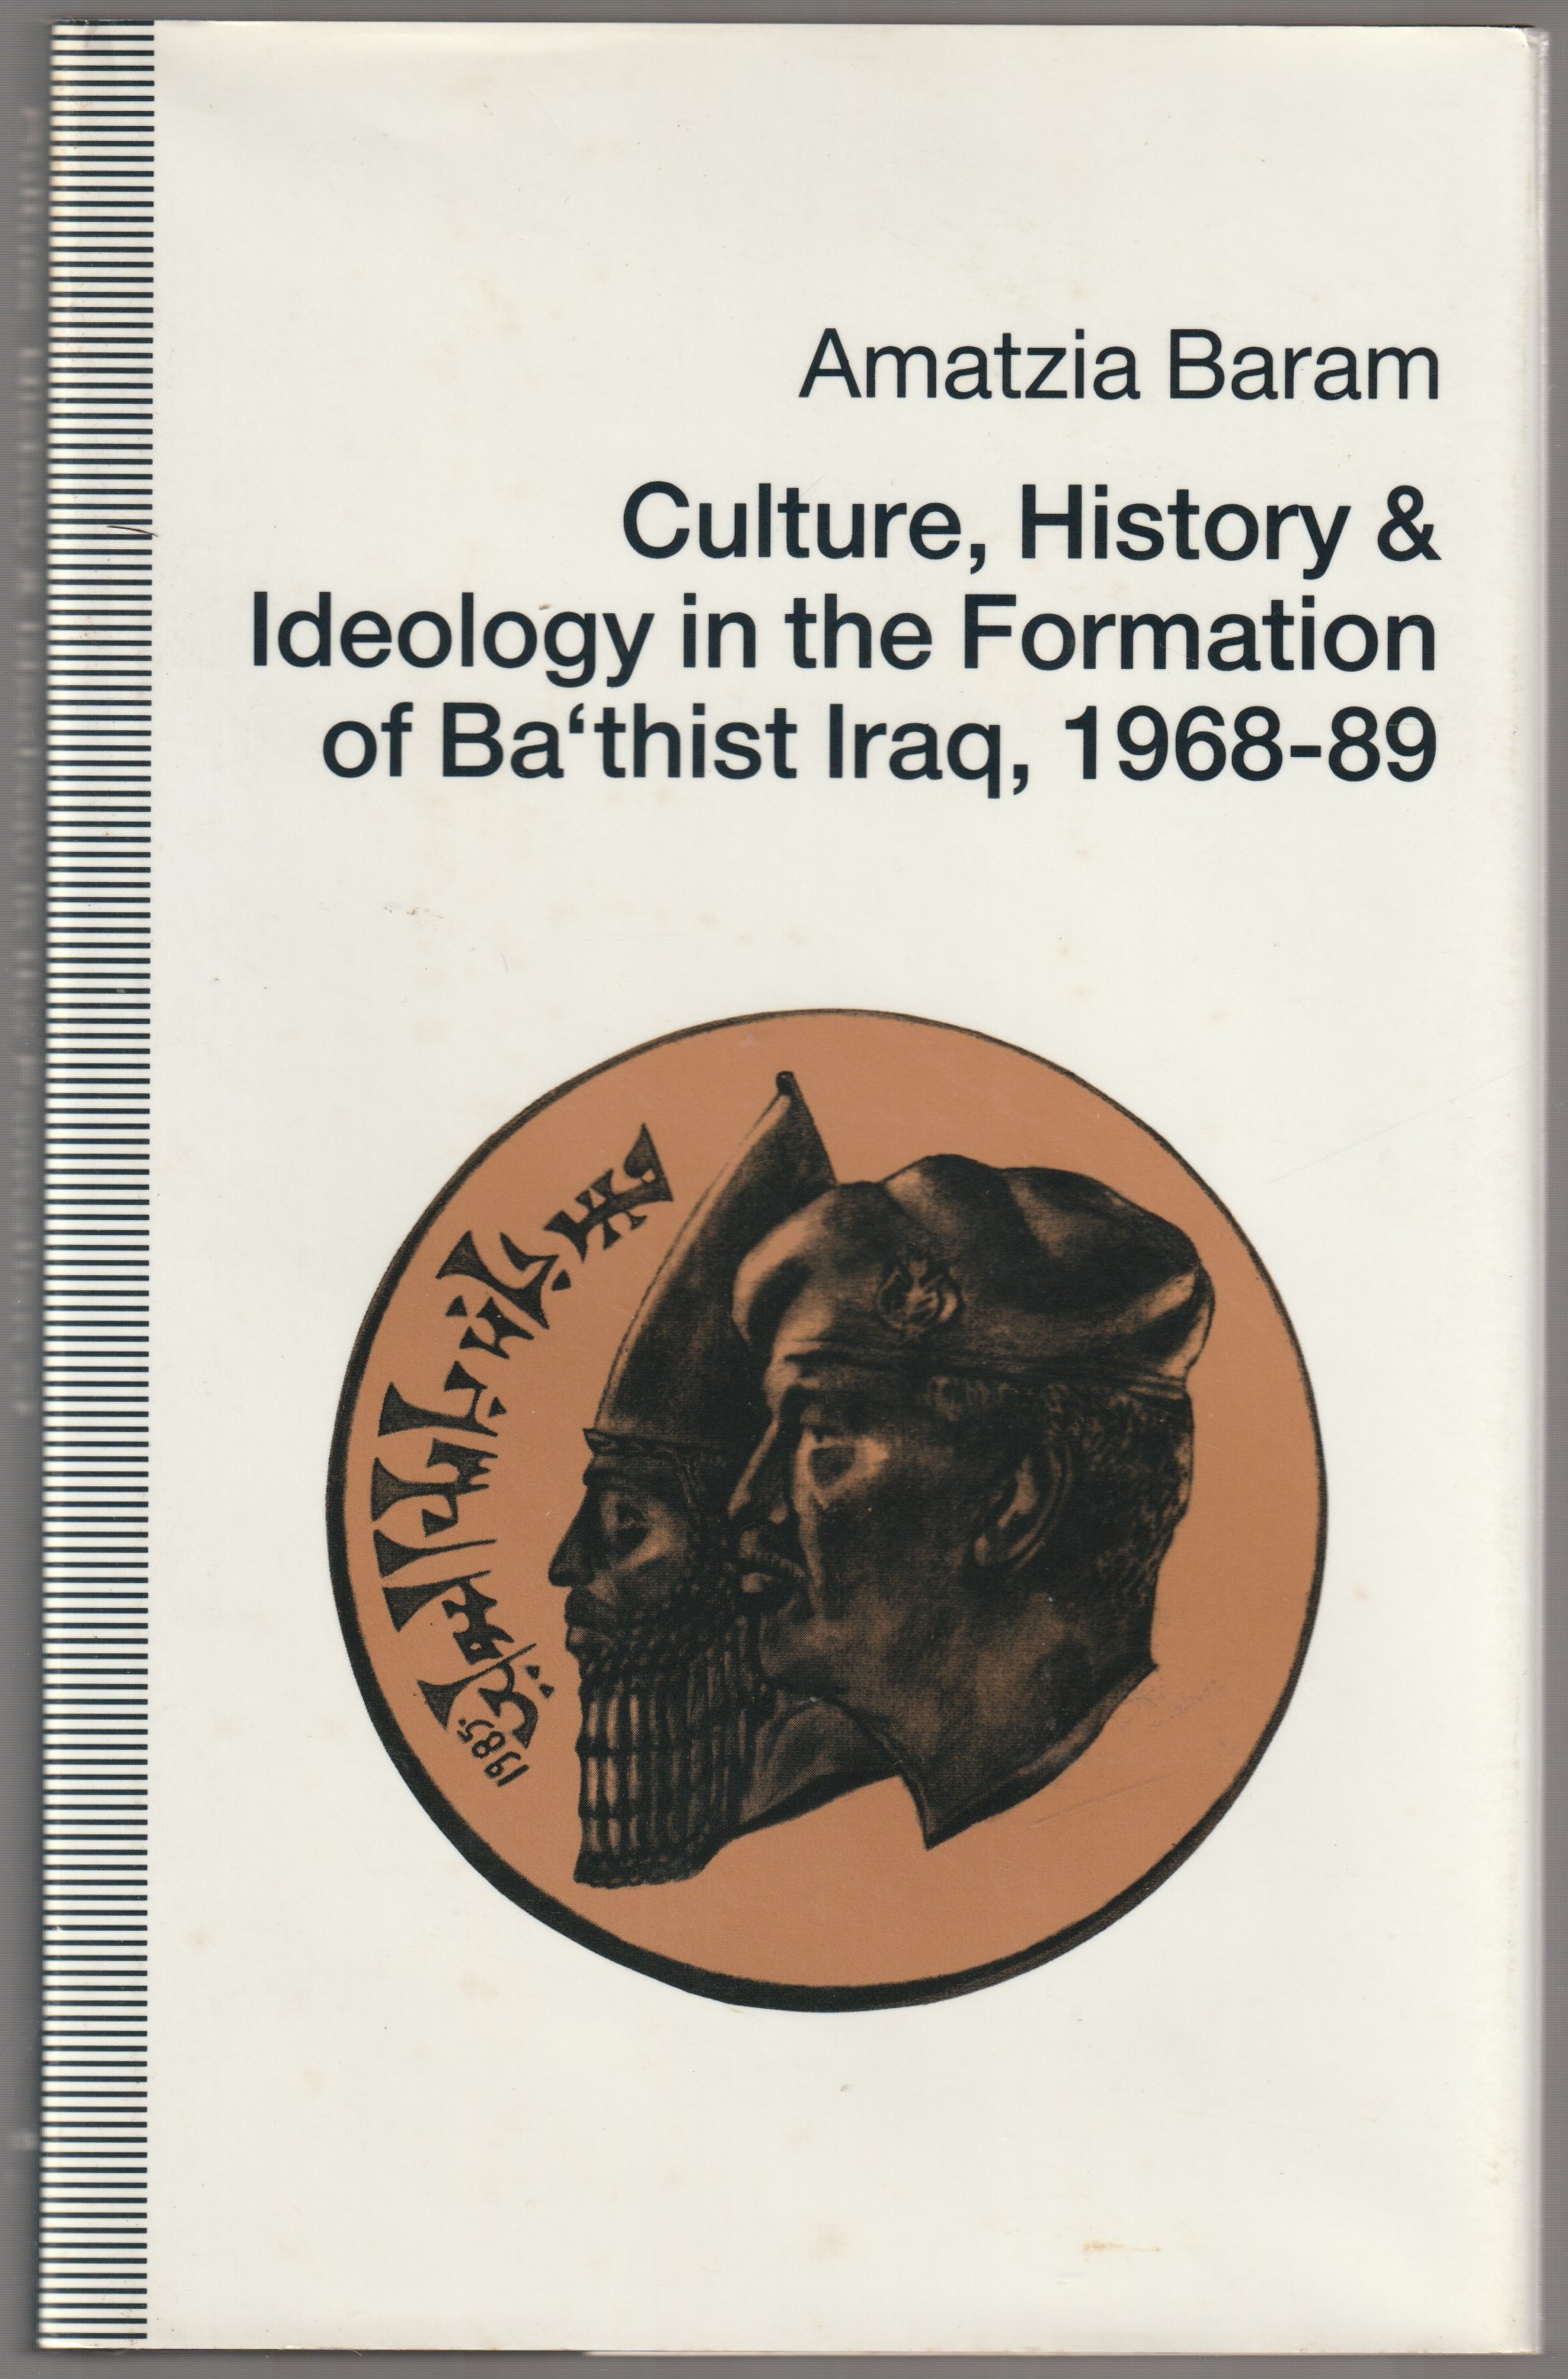 Culture, history and ideology in the formation of Bathist Iraq, 1968-89.